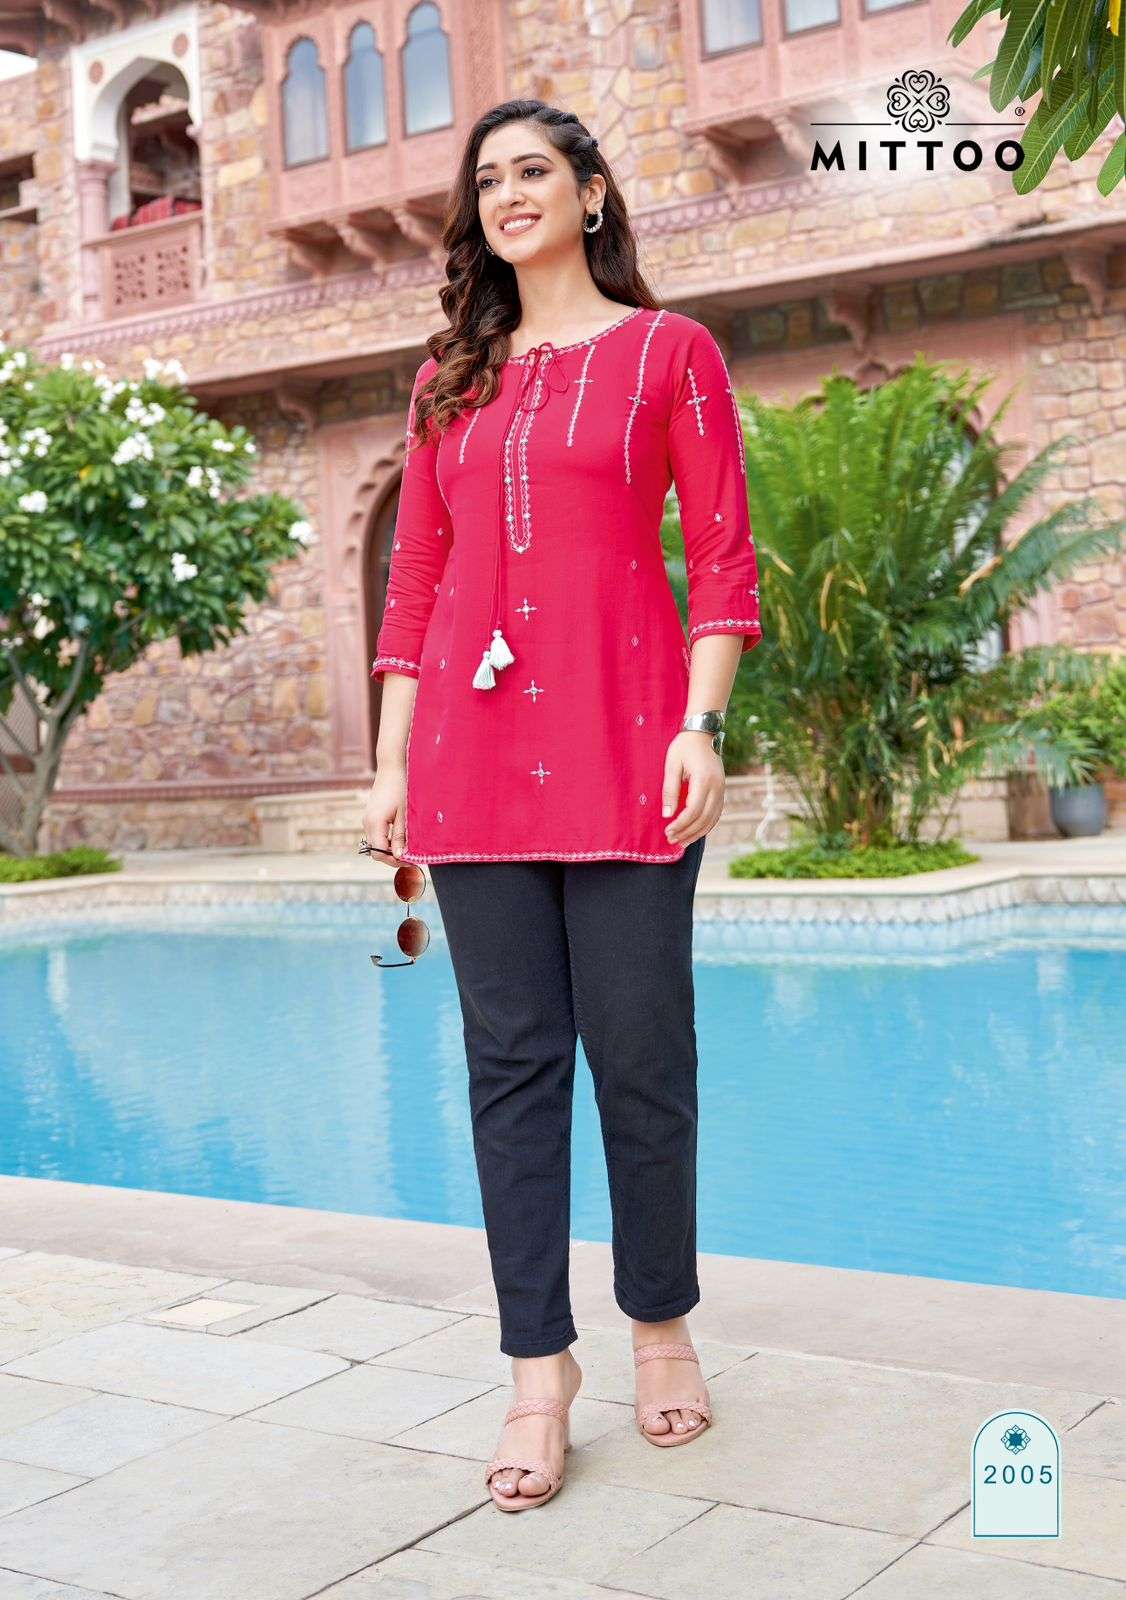 Softy Buy Mittoo Online Wholesaler Latest Collection Tunic Kurtis